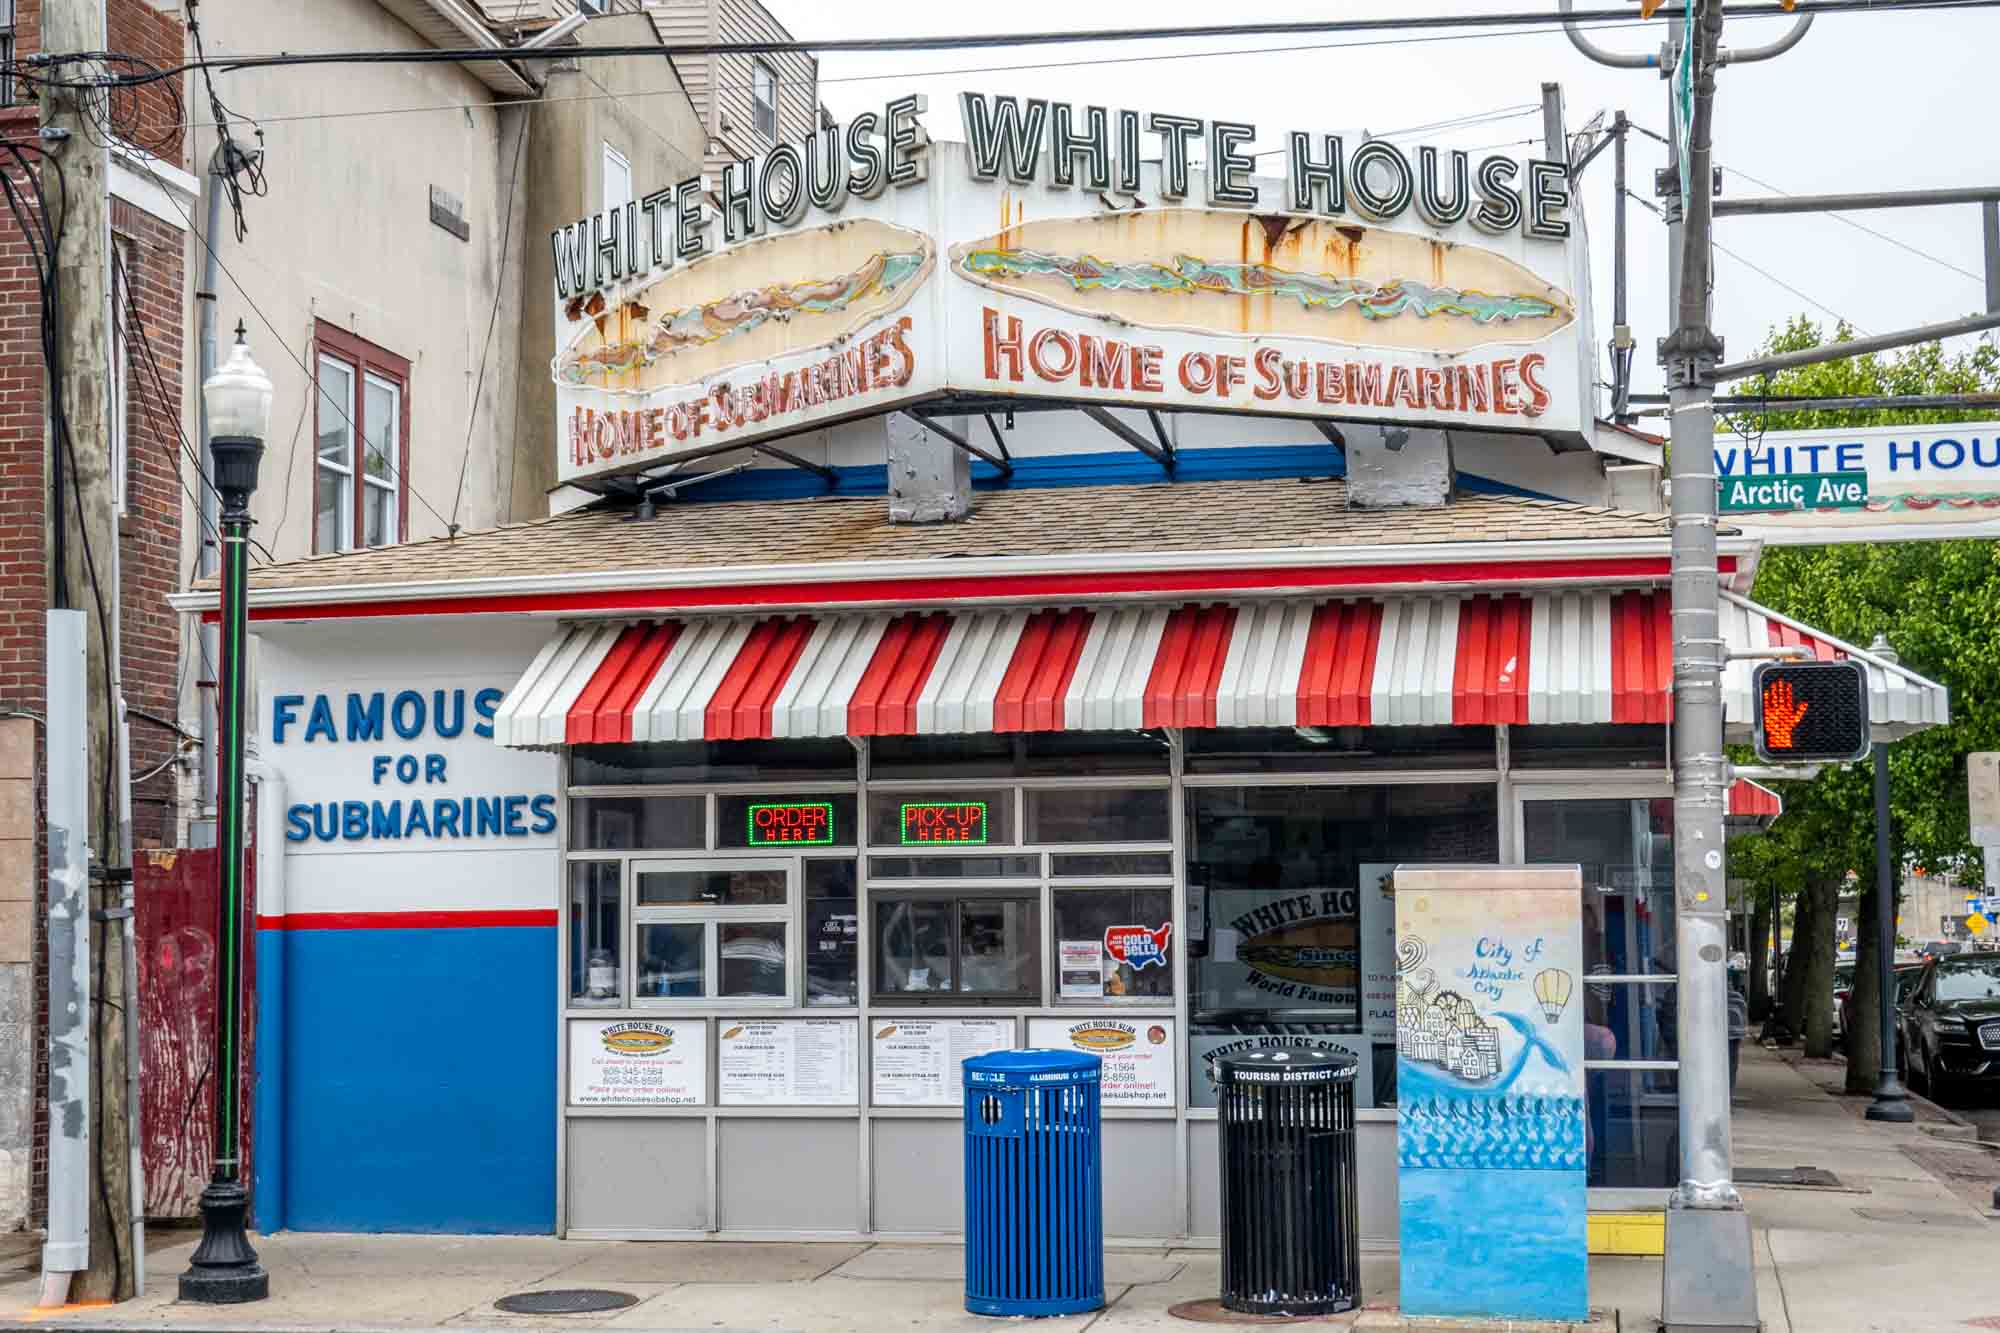 Exterior of a building with a red and white awning and large neon sign for "White House: Home of Submarines"